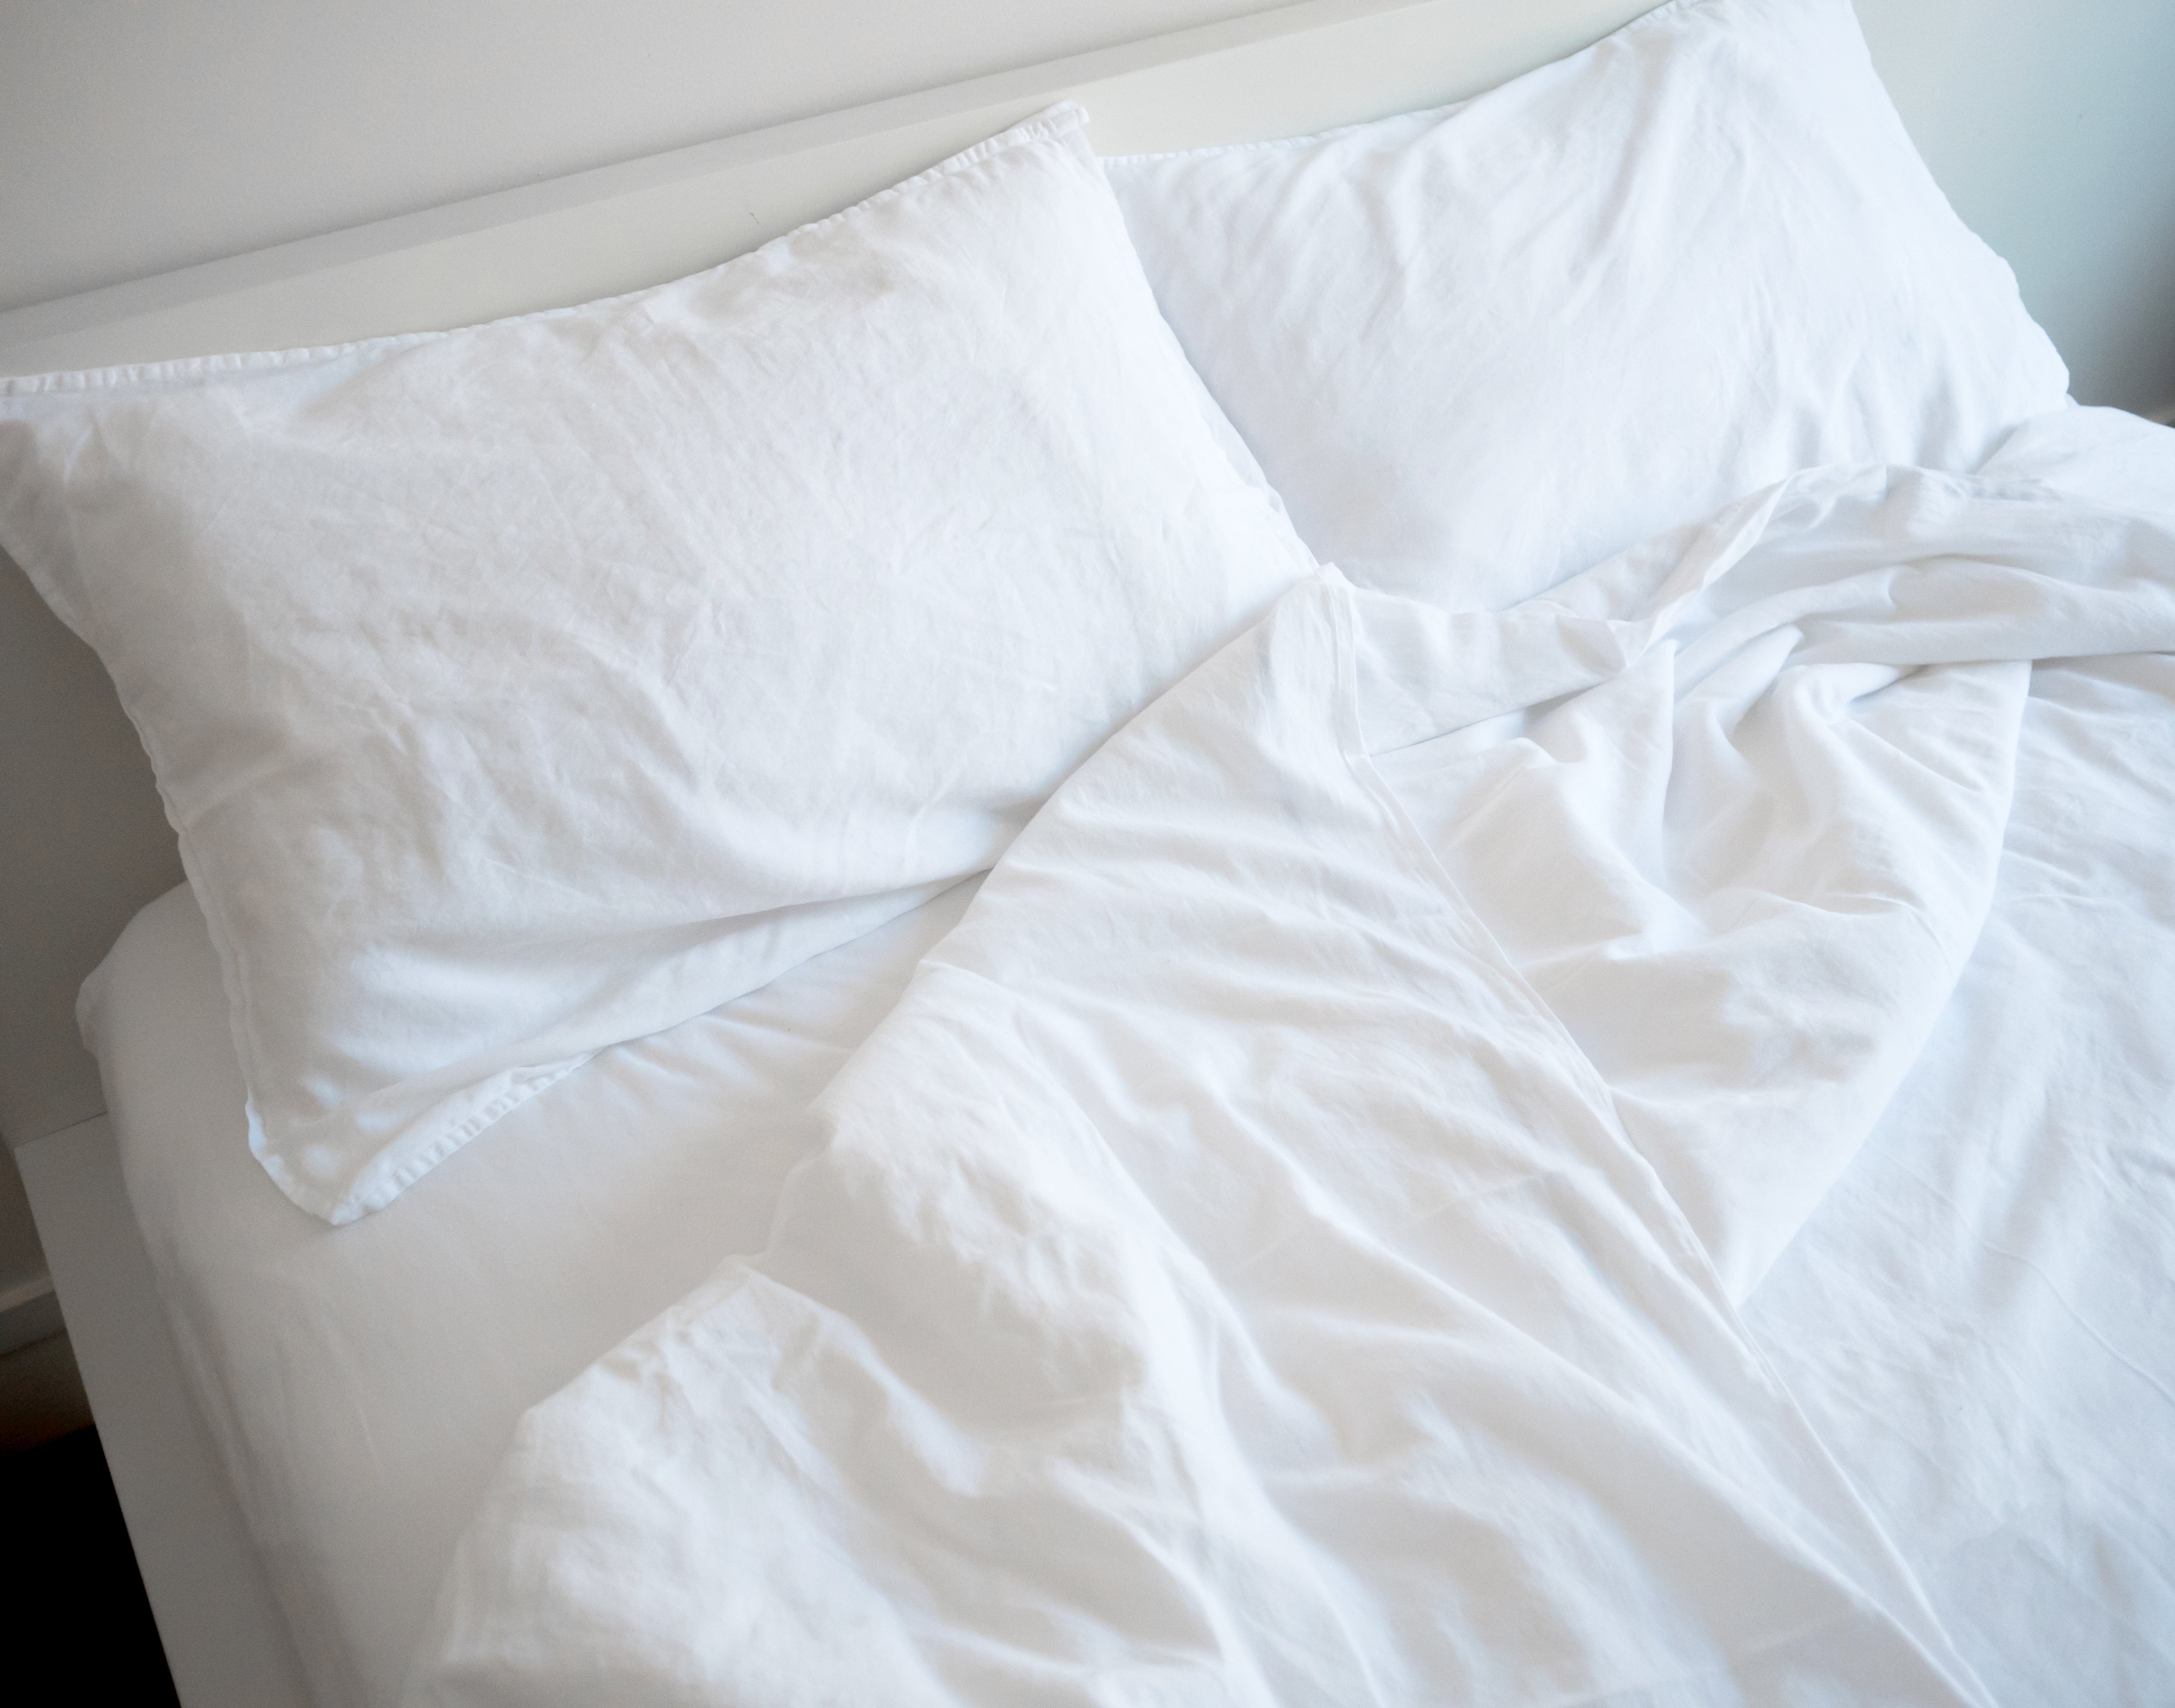 The Definitive Guide To Buying Bed Sheets The Truth About Thread Cou